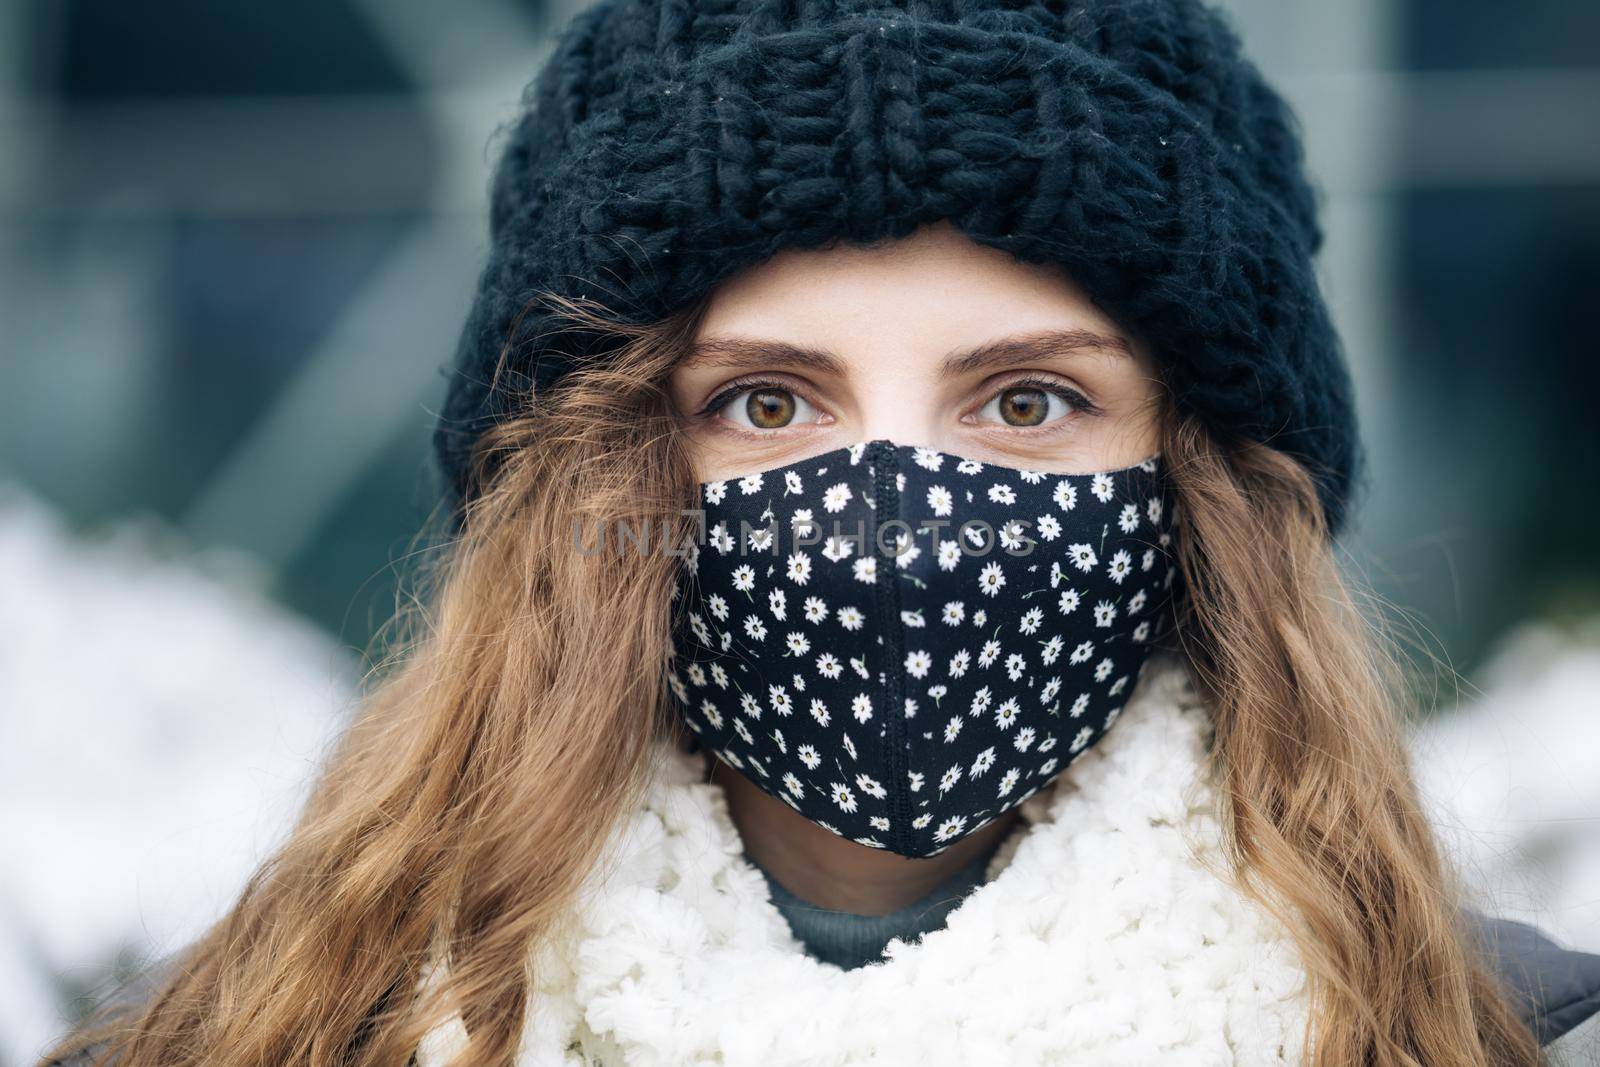 Woman in medical face mask standing against city. COVID-19 Pandemic Coronavirus Woman in a city wearing face mask protective for spreading of disease virus SARS-CoV-2 by uflypro